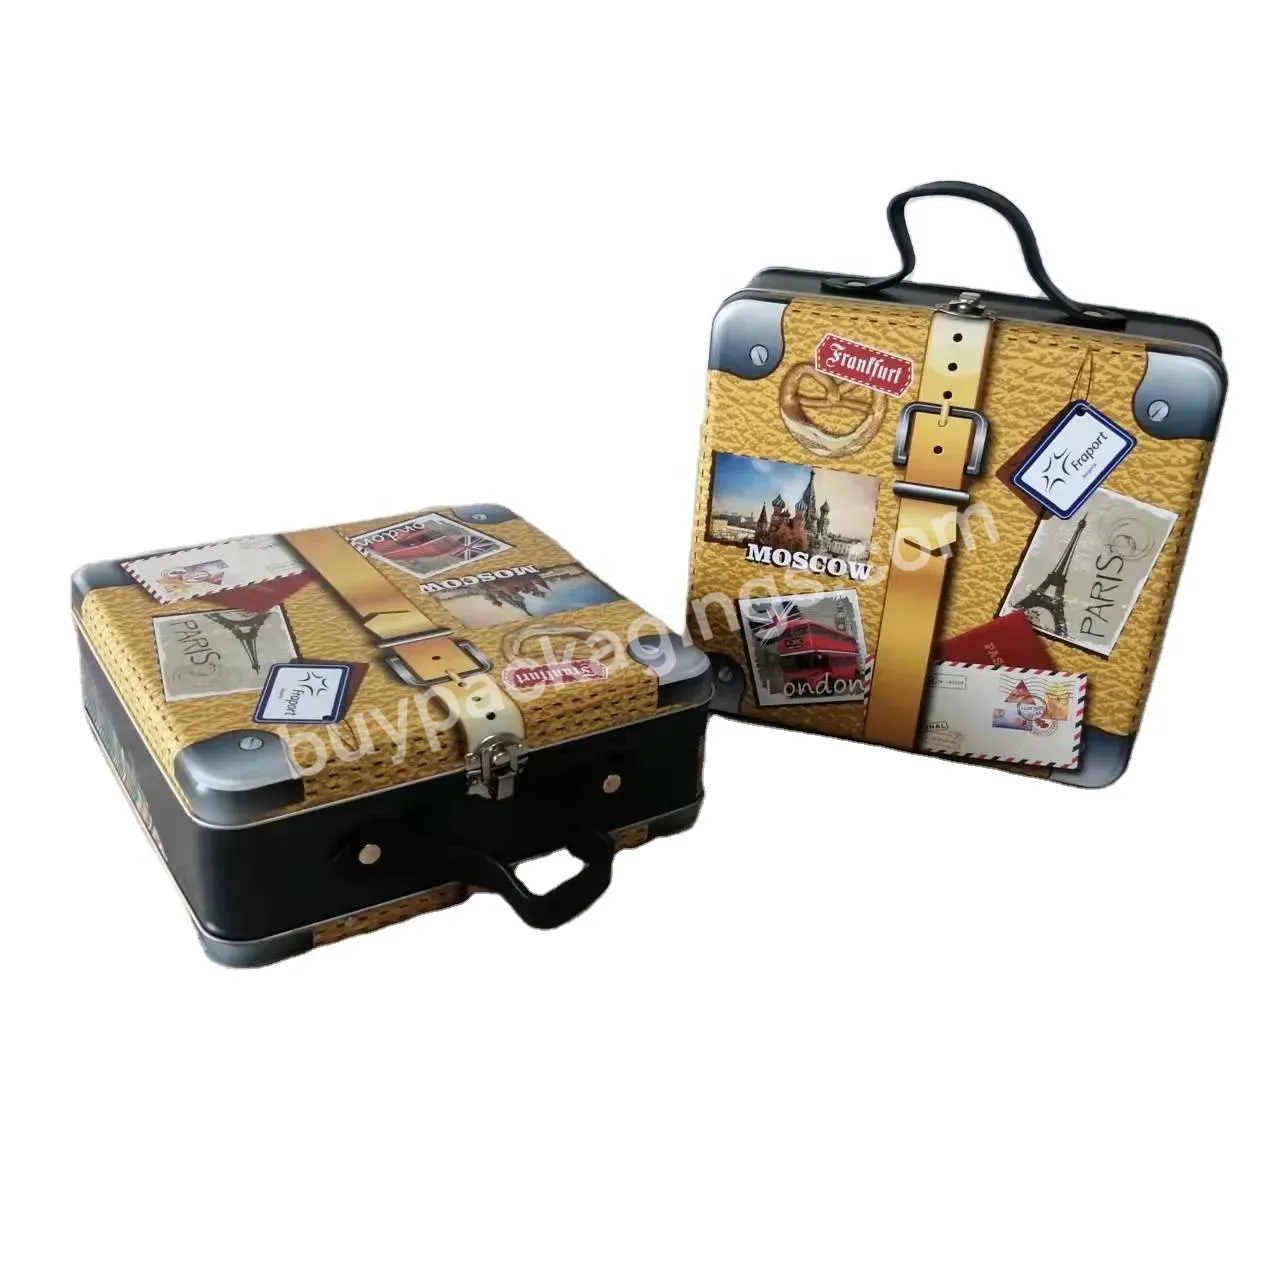 Custom Design Large Suitcase Tin Box With Pu Handle And With Clasp 225x210x80mm - Buy Tin Suitcase Box Decorative,Big Lunch Tin Box With Leather Handle,Suitcase Metal Box With Pu Handle And Locker.